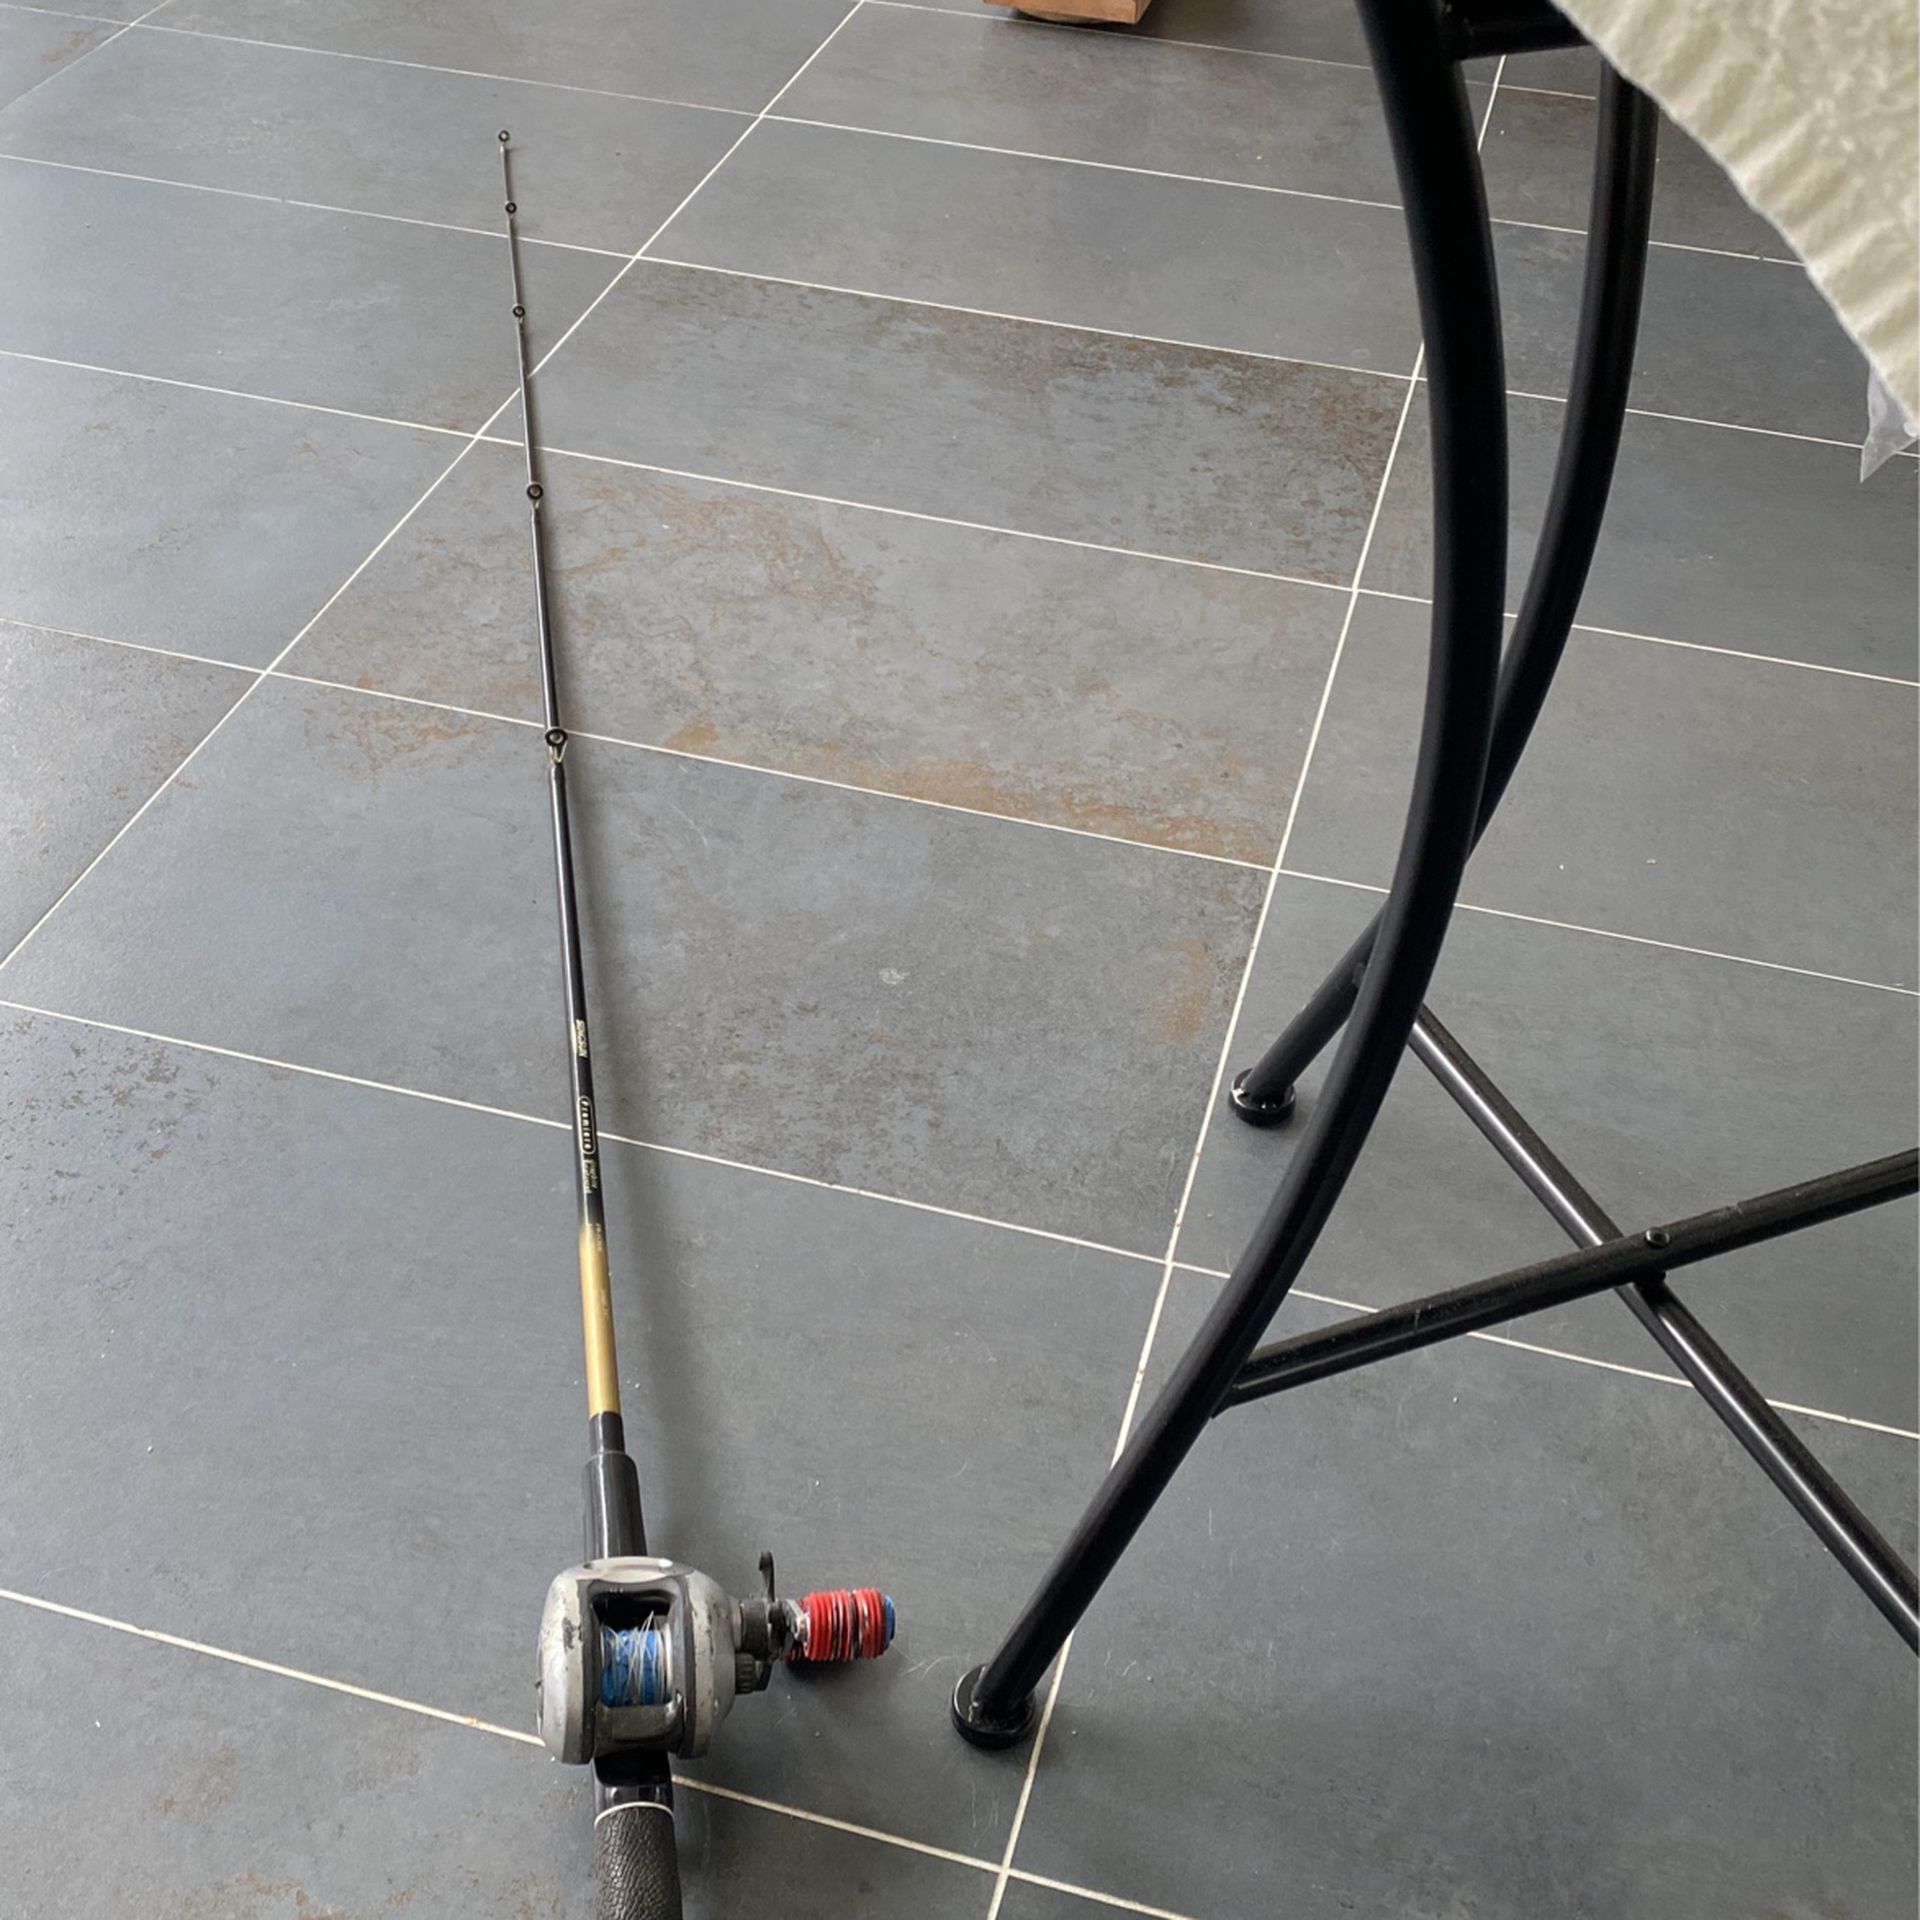 New Graphite Reinforced 6’ Rod With Old Ugly Low Profile Smooth reel. 